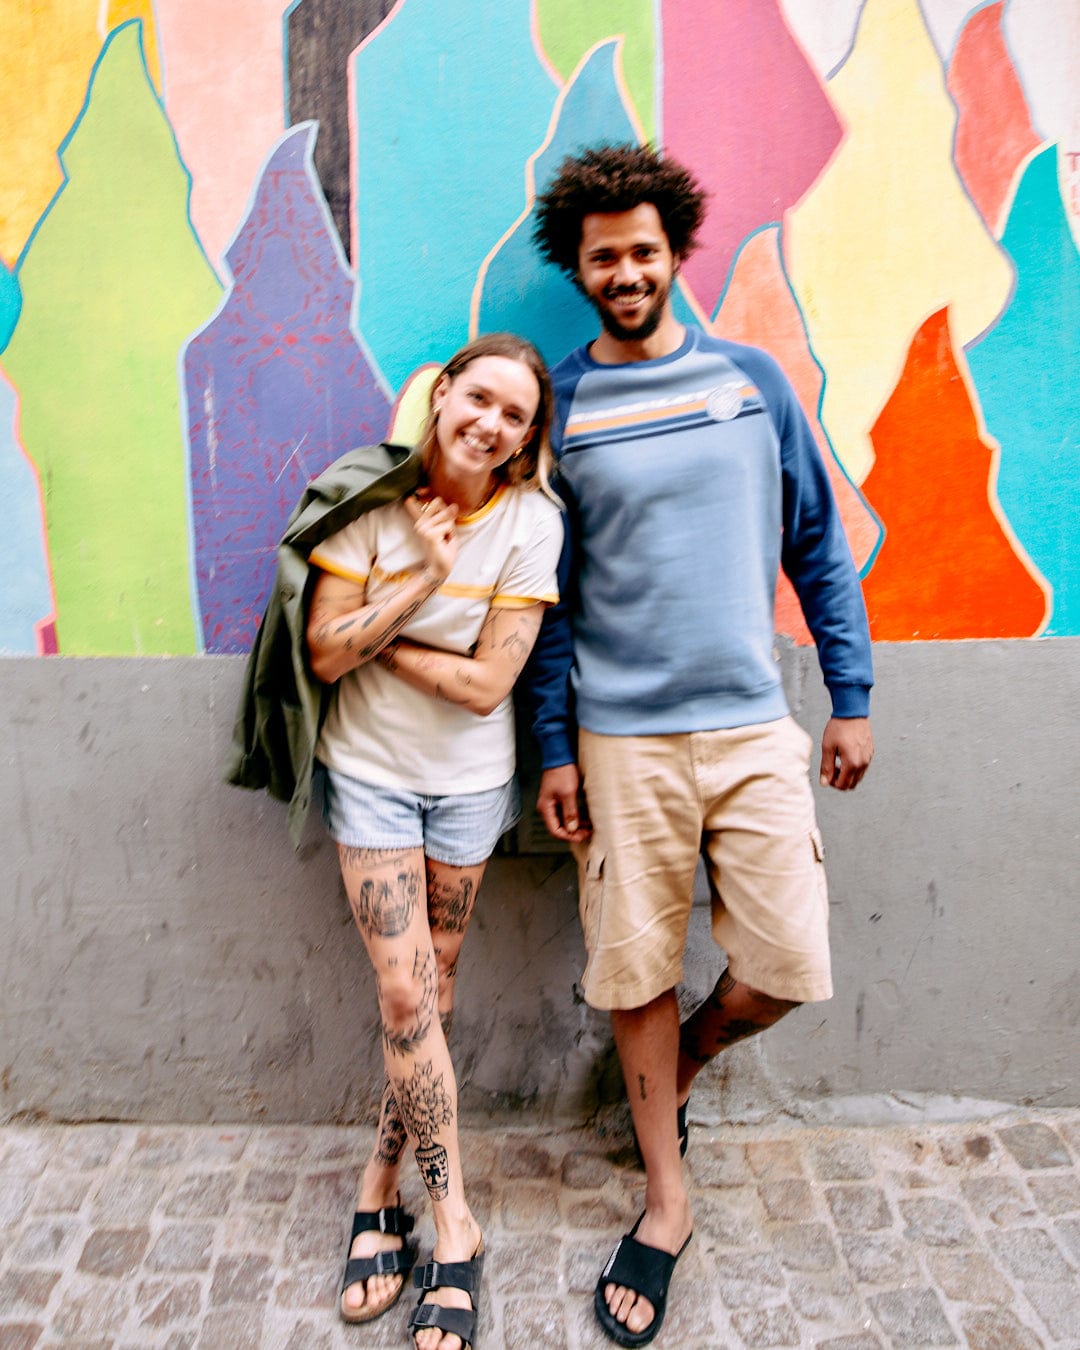 A smiling young couple standing in front of a colorful mural, the man with afro hair and the woman displaying tattooed legs and a Saltrock Retro Ribbon - Womens Shorts Sleeve T-Shirt in White.